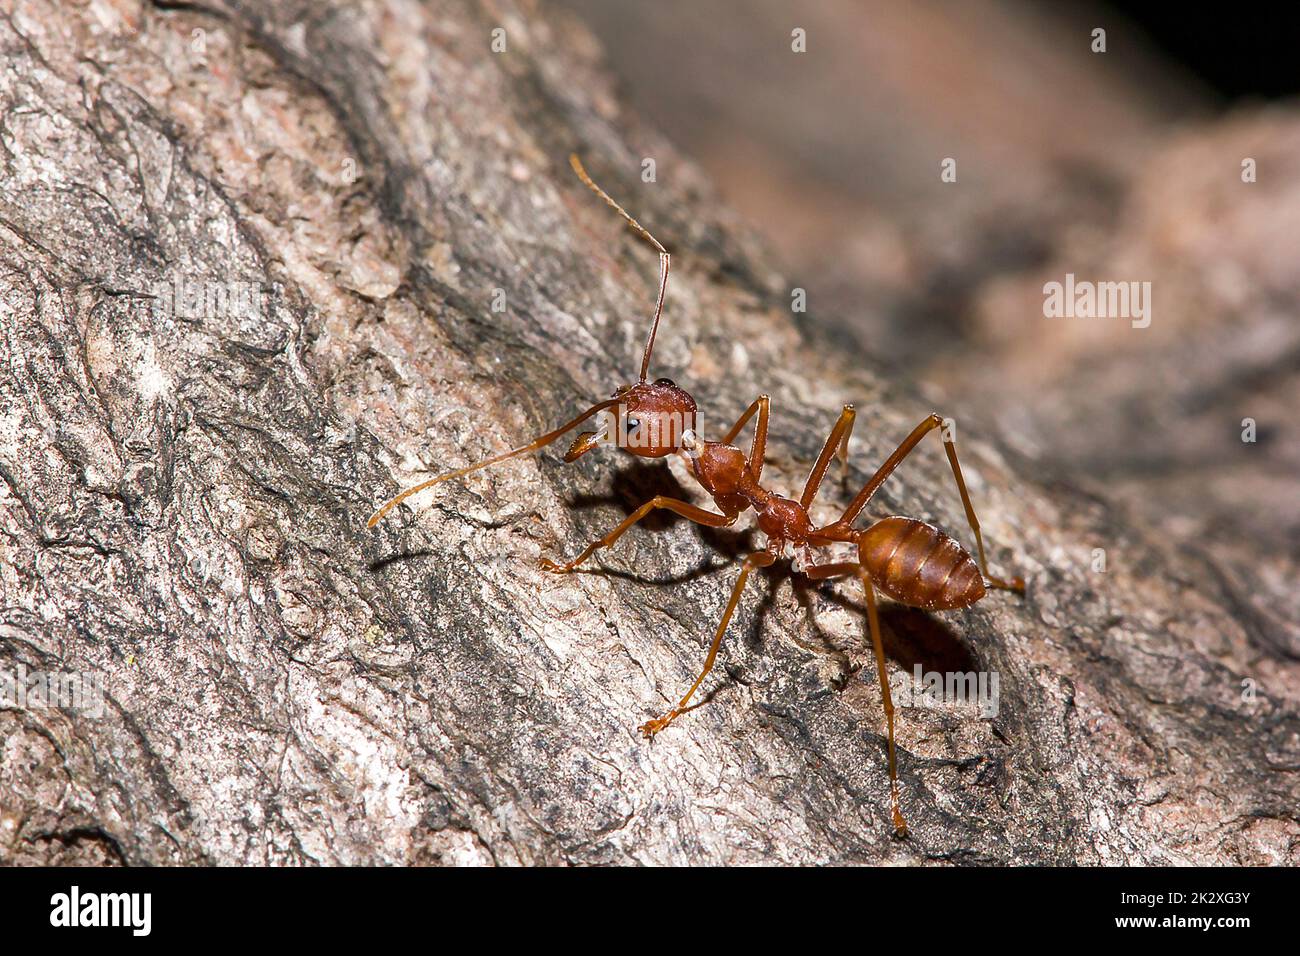 OWeaver ants or Green ants. The body, tentacles, and legs are orange on dry wood. Stock Photo